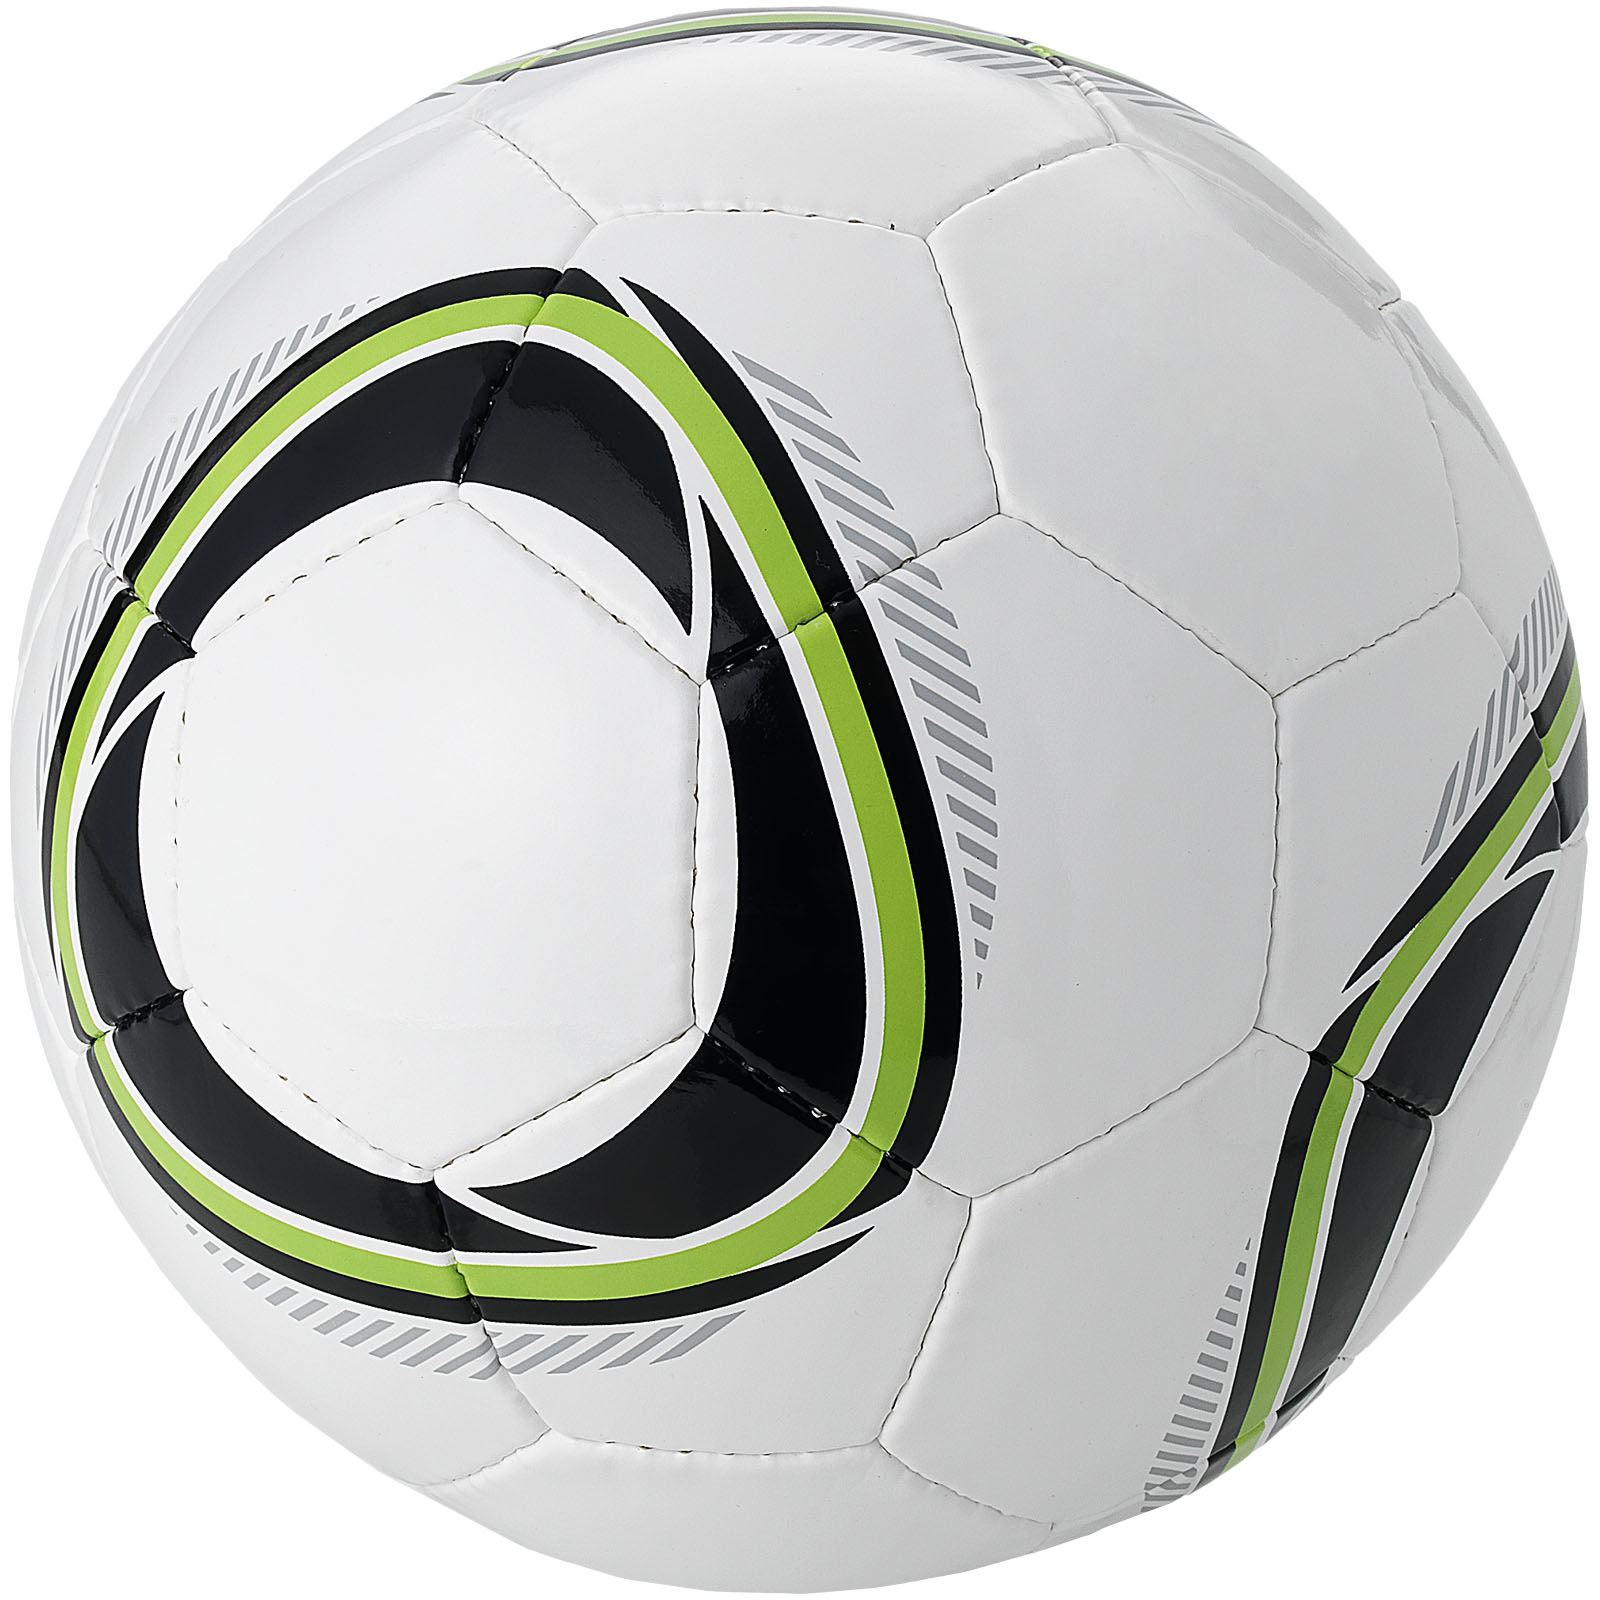 Double Layer 32-Panel Lime Green Football Size 4 - Barcombe